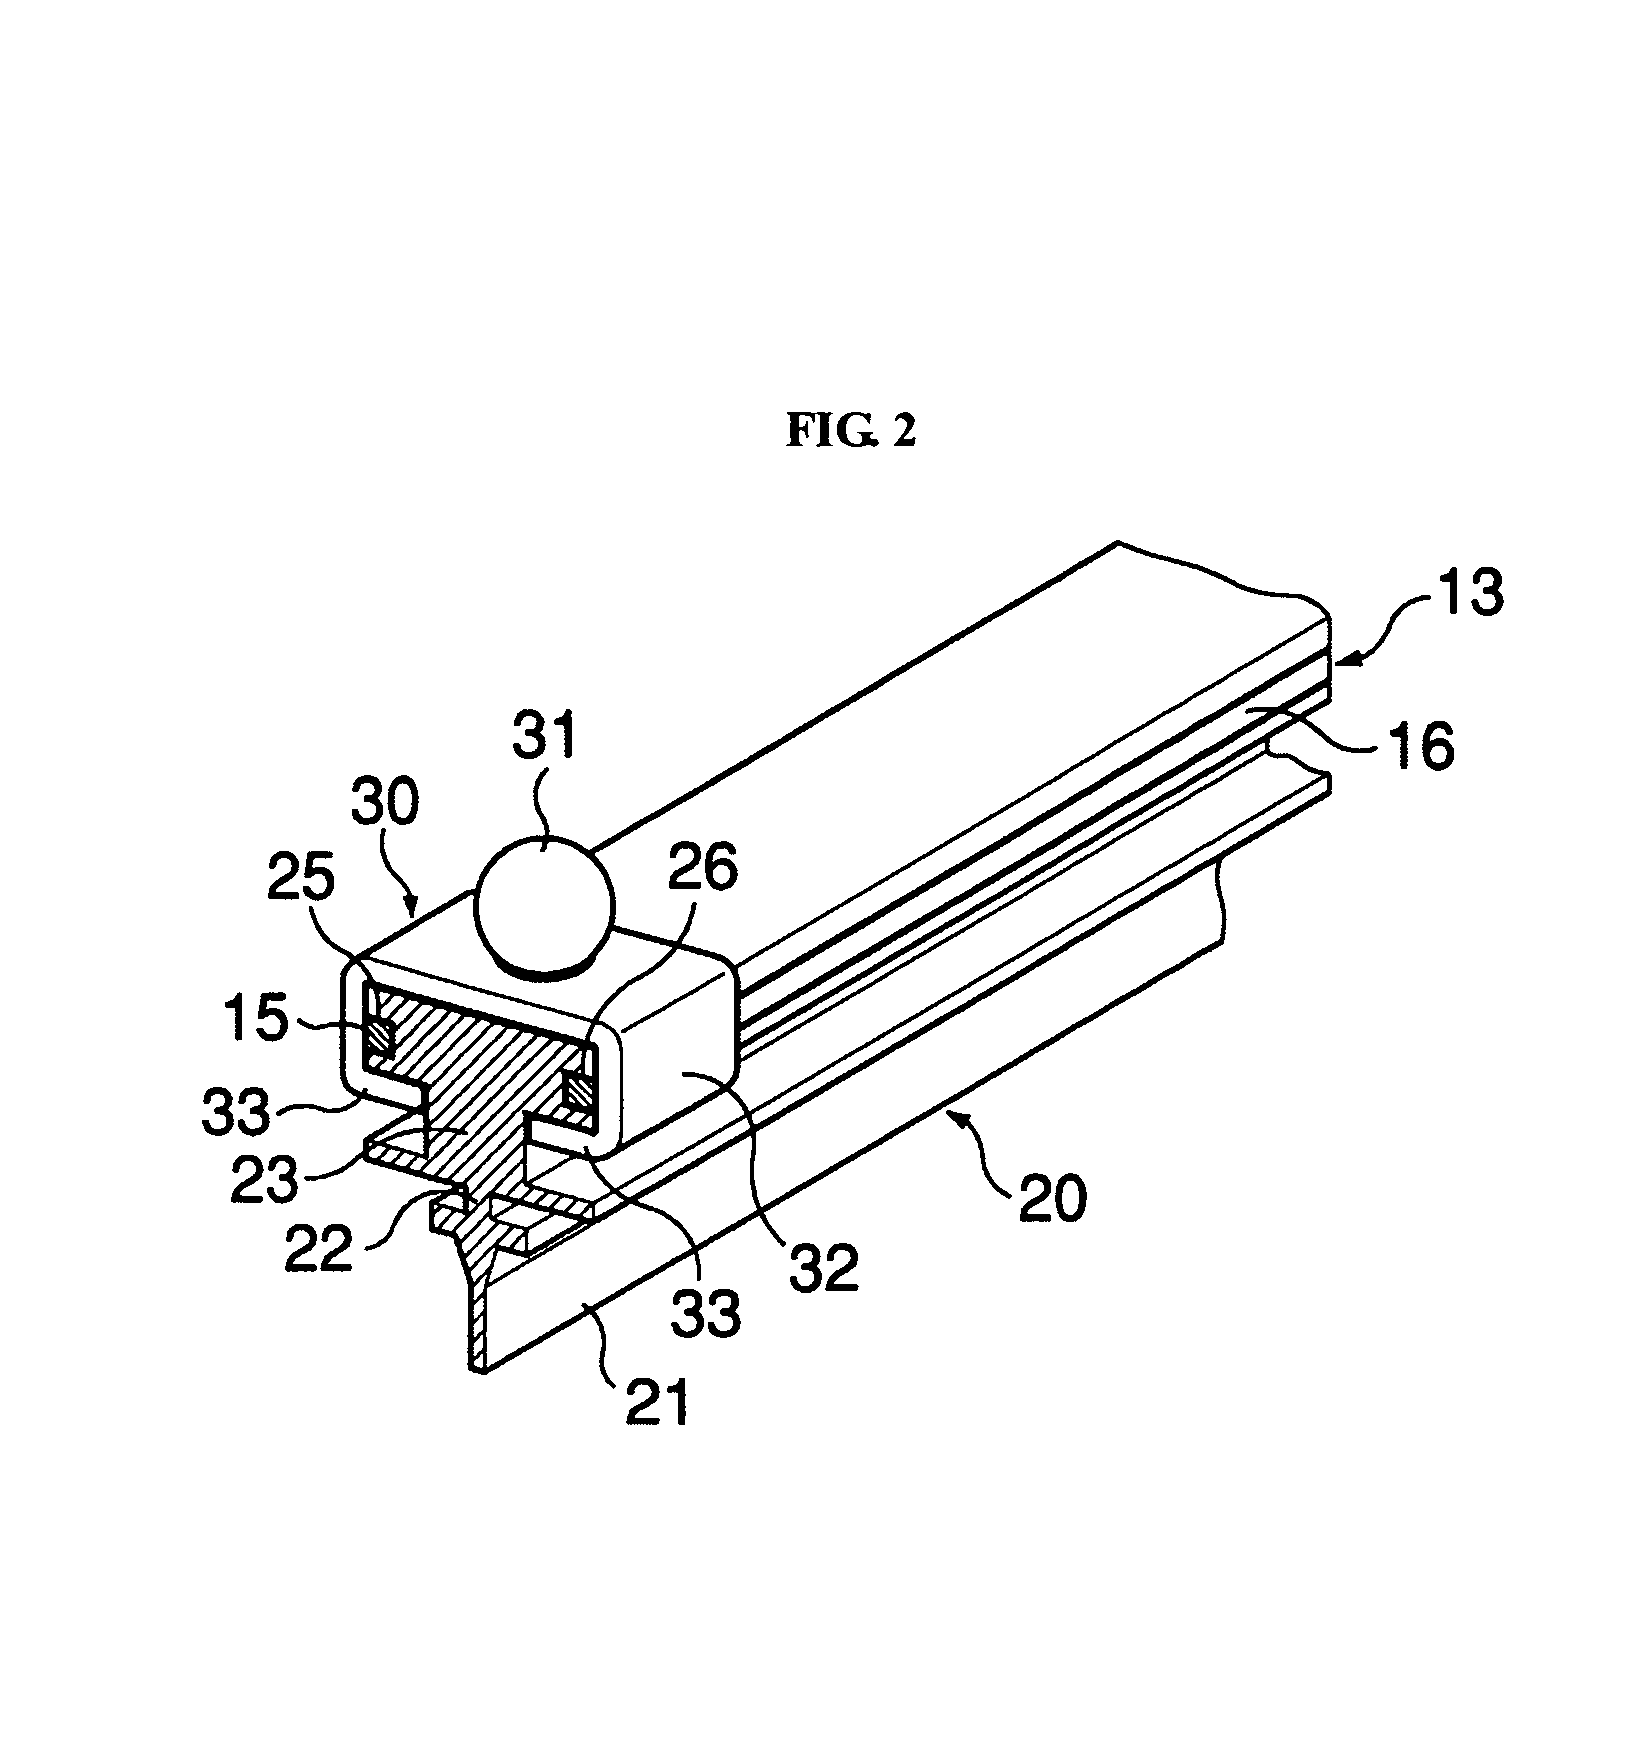 Wiper blade assembly for motor vehicle